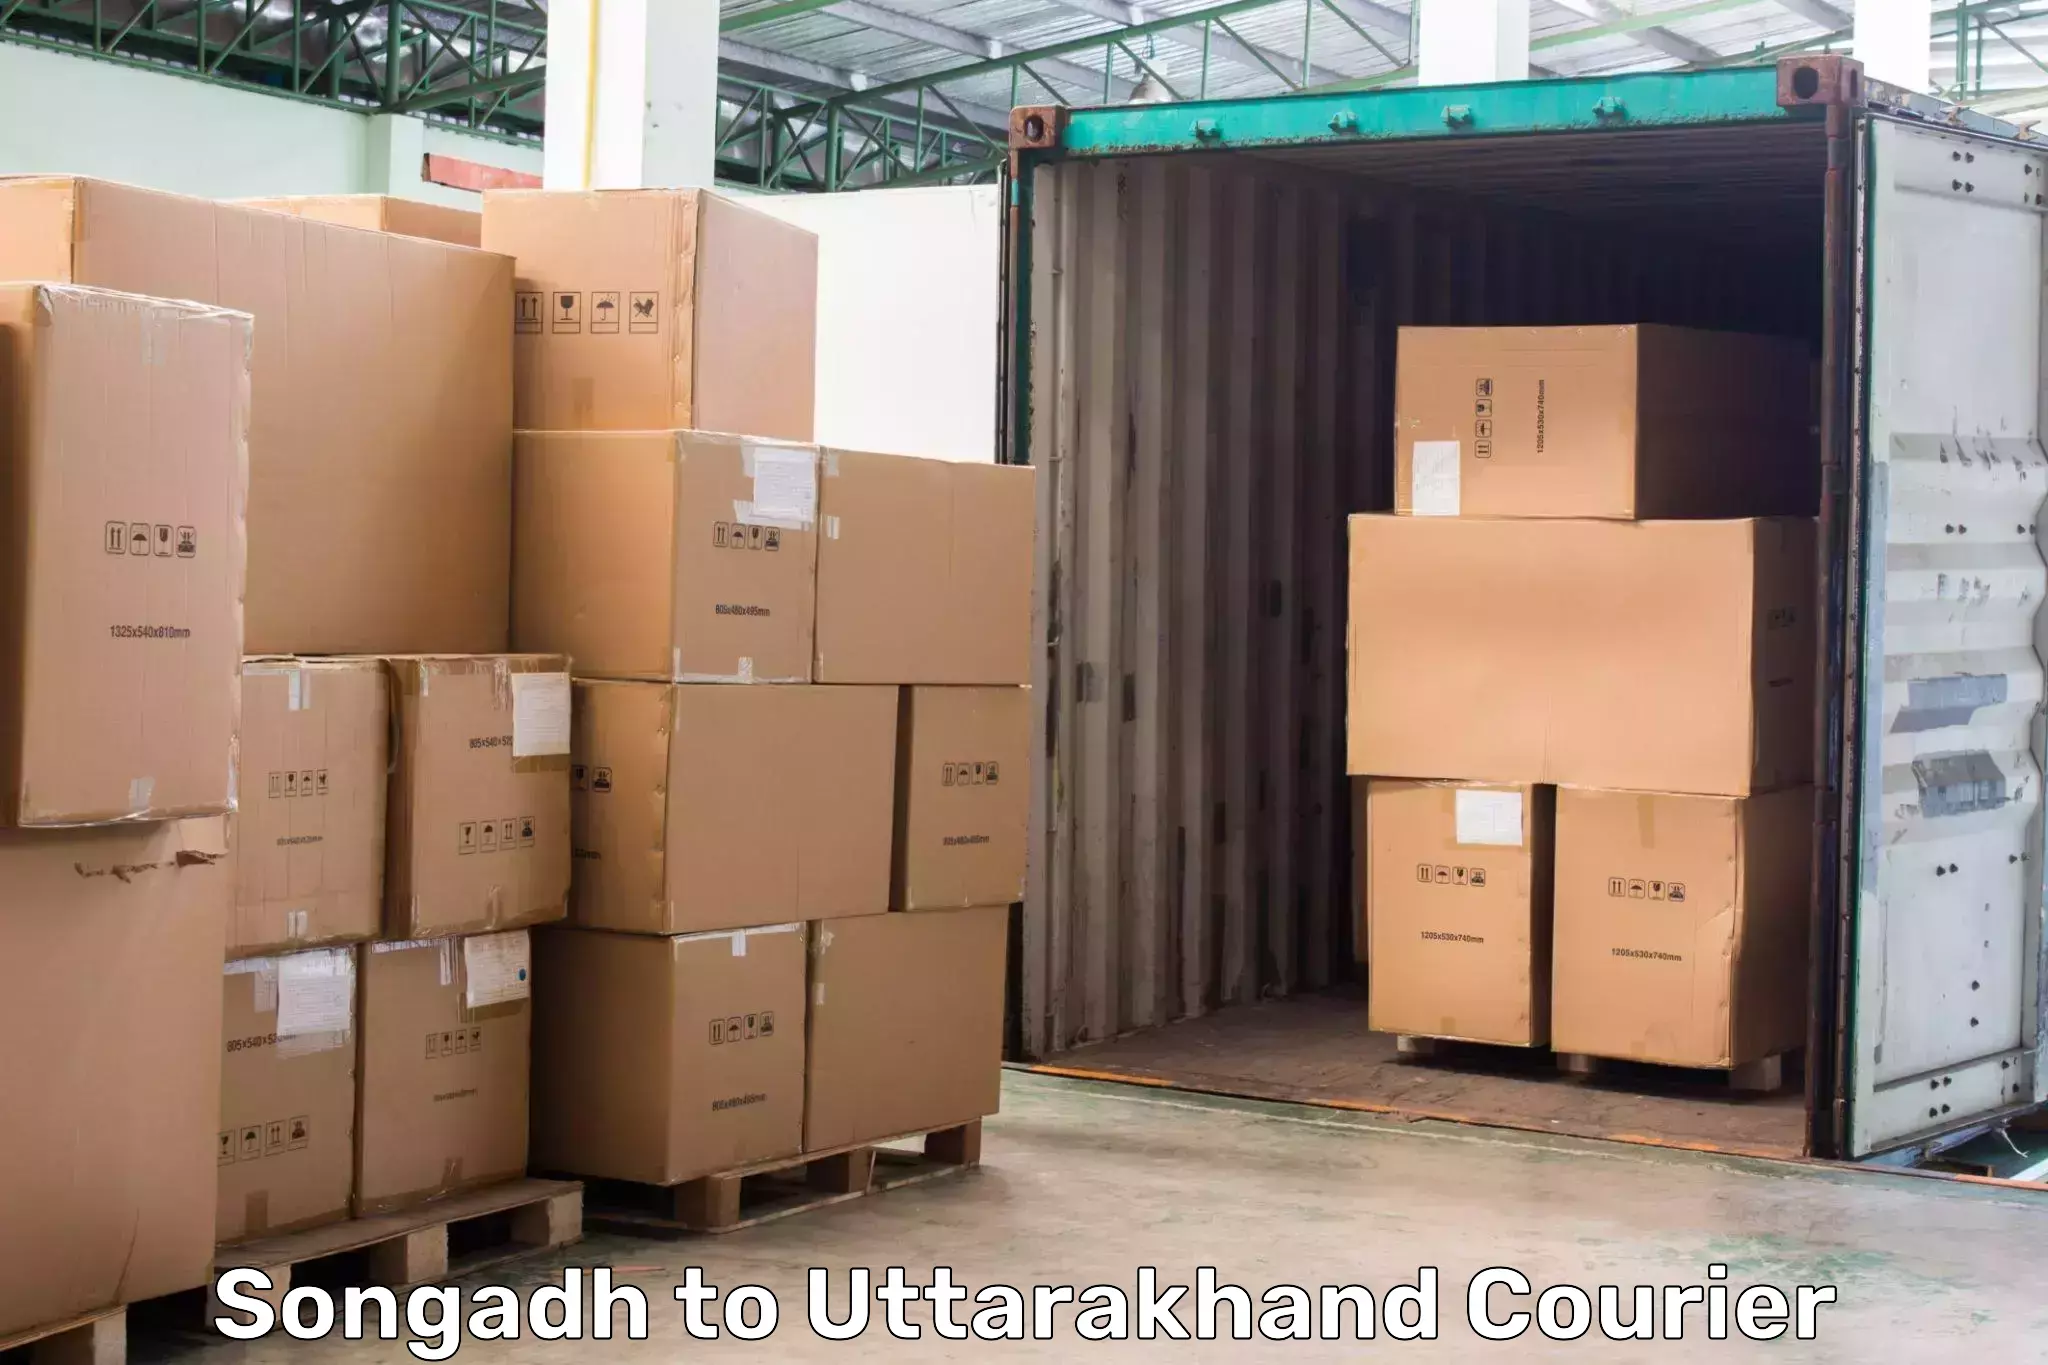 Courier service partnerships Songadh to Uttarakhand